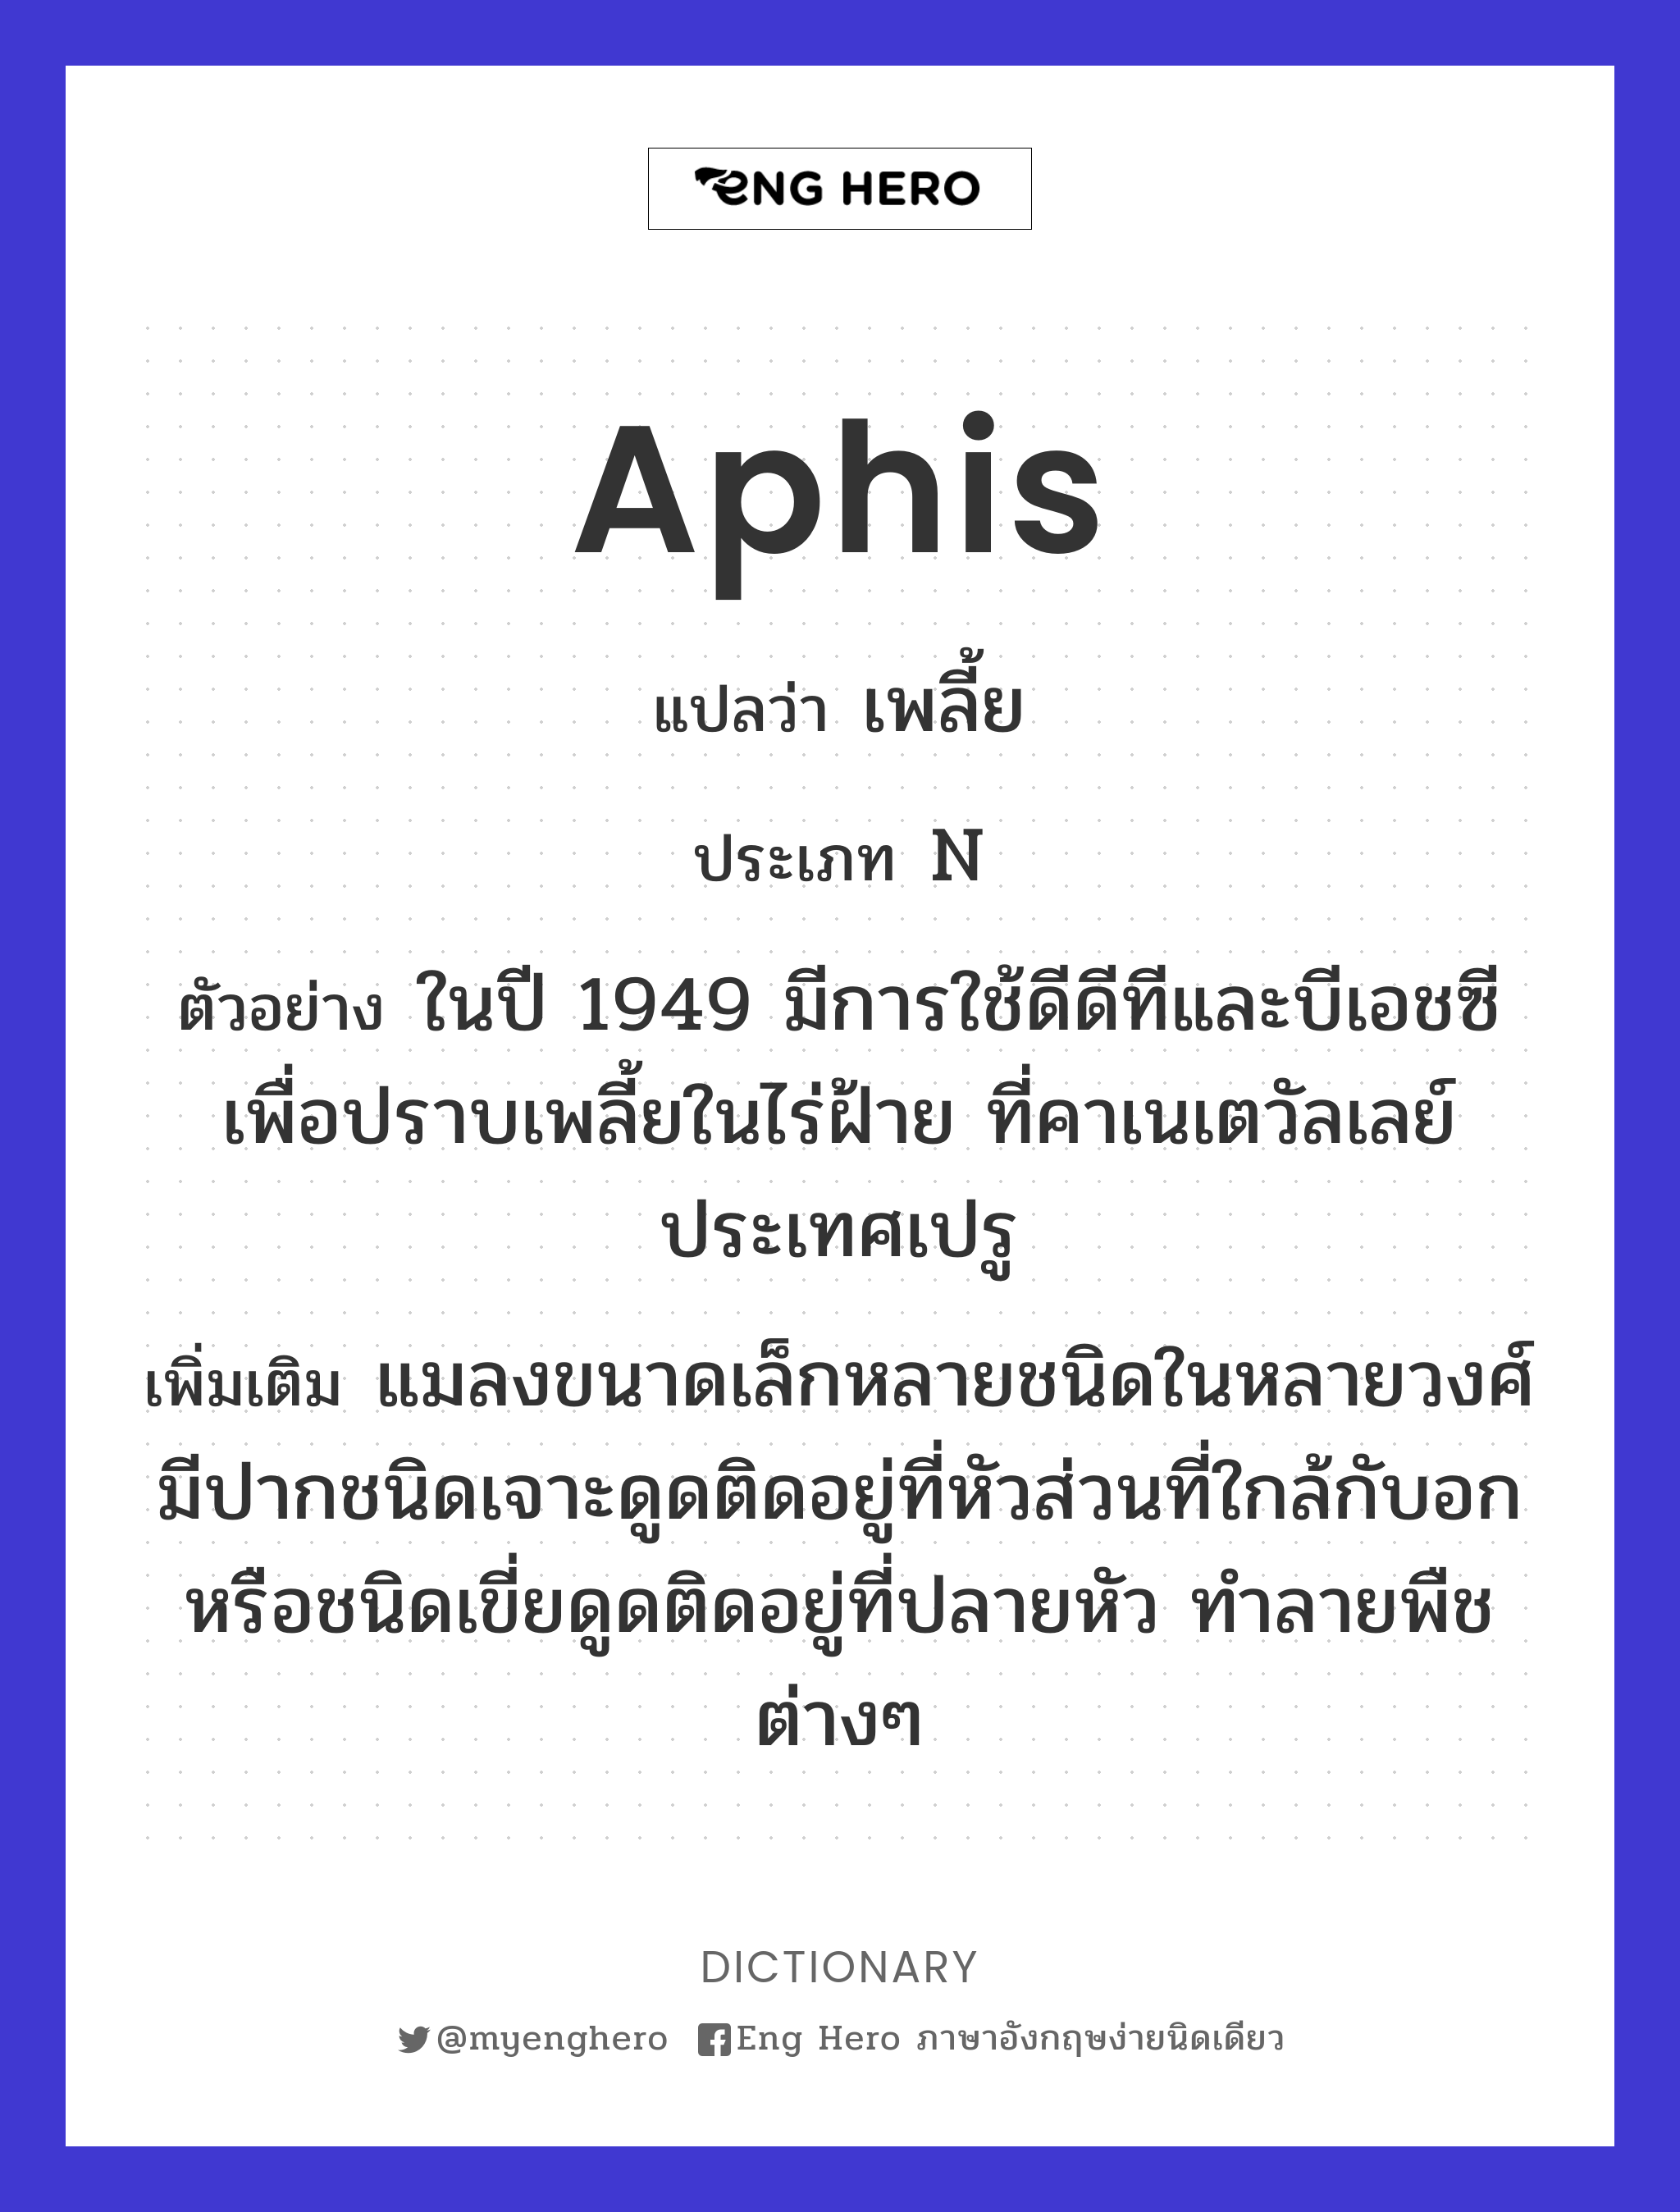 aphis